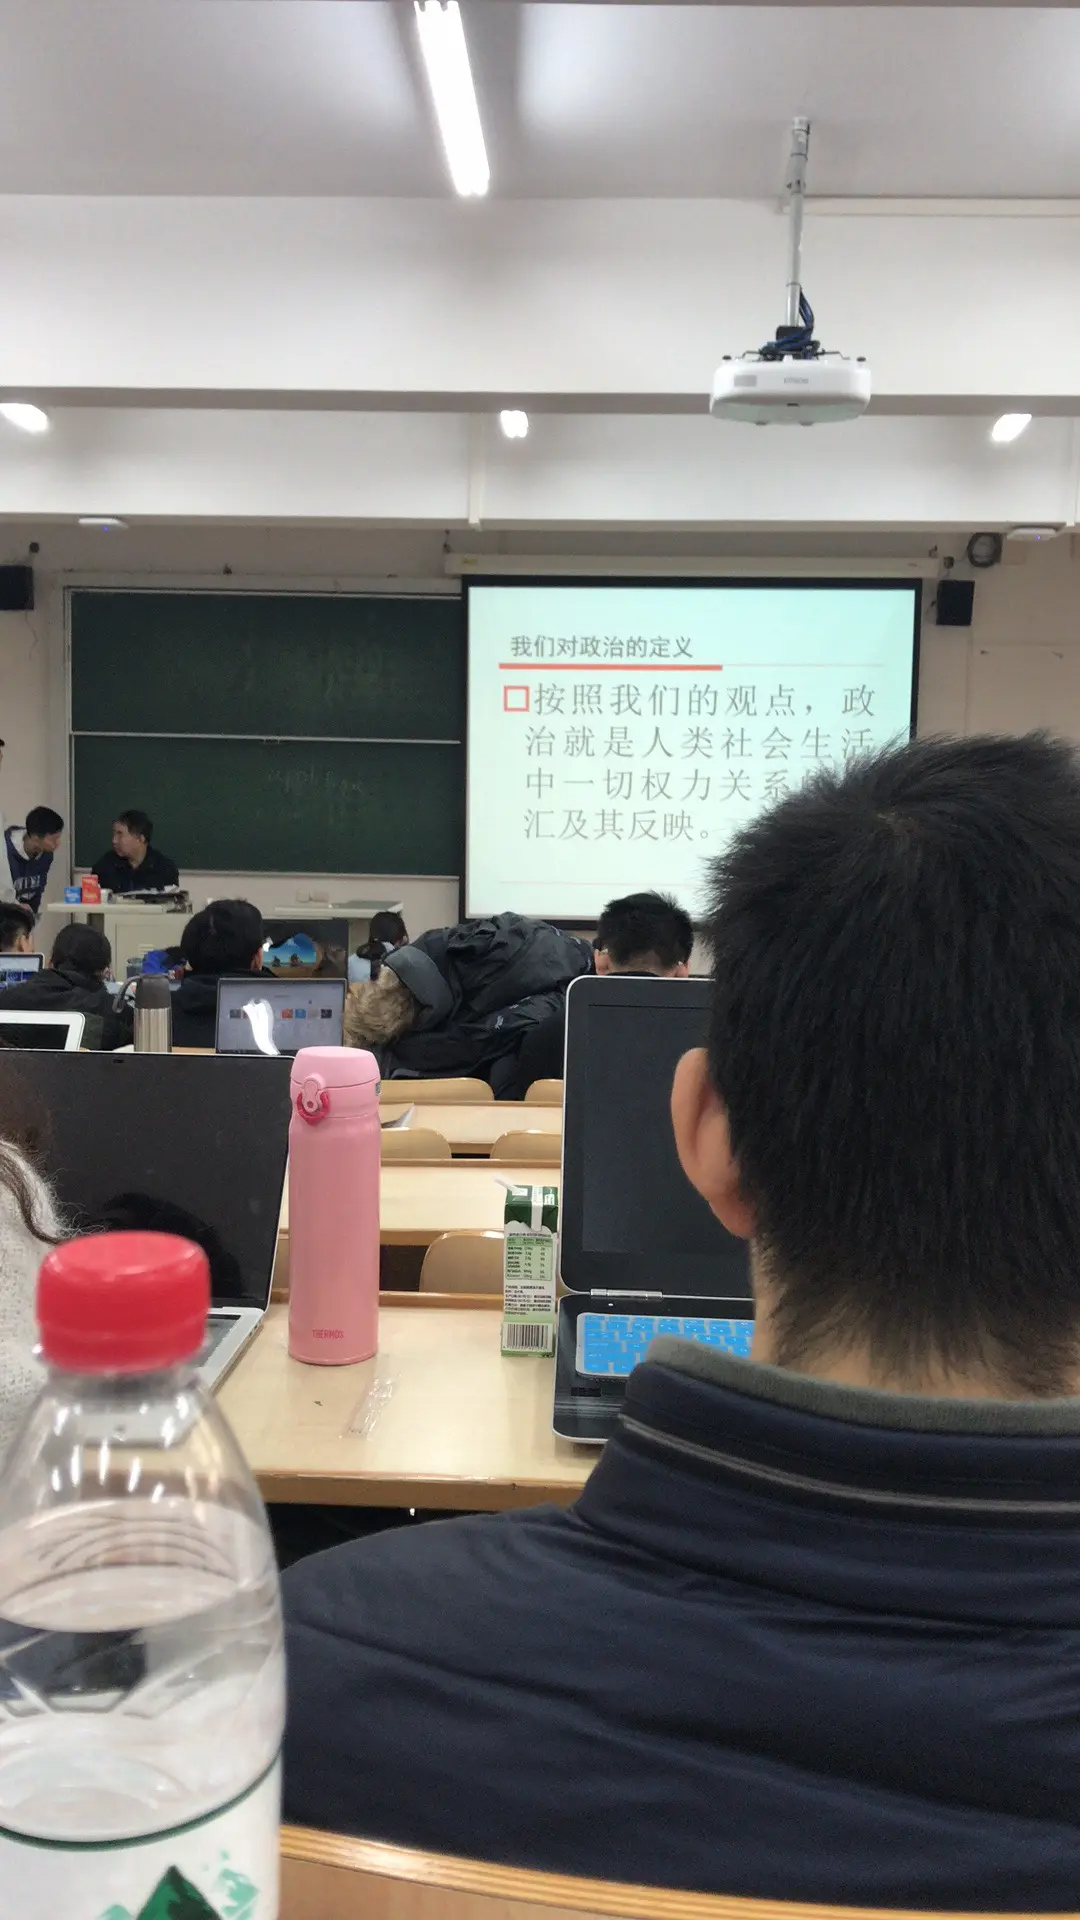 Studying in a chinese university